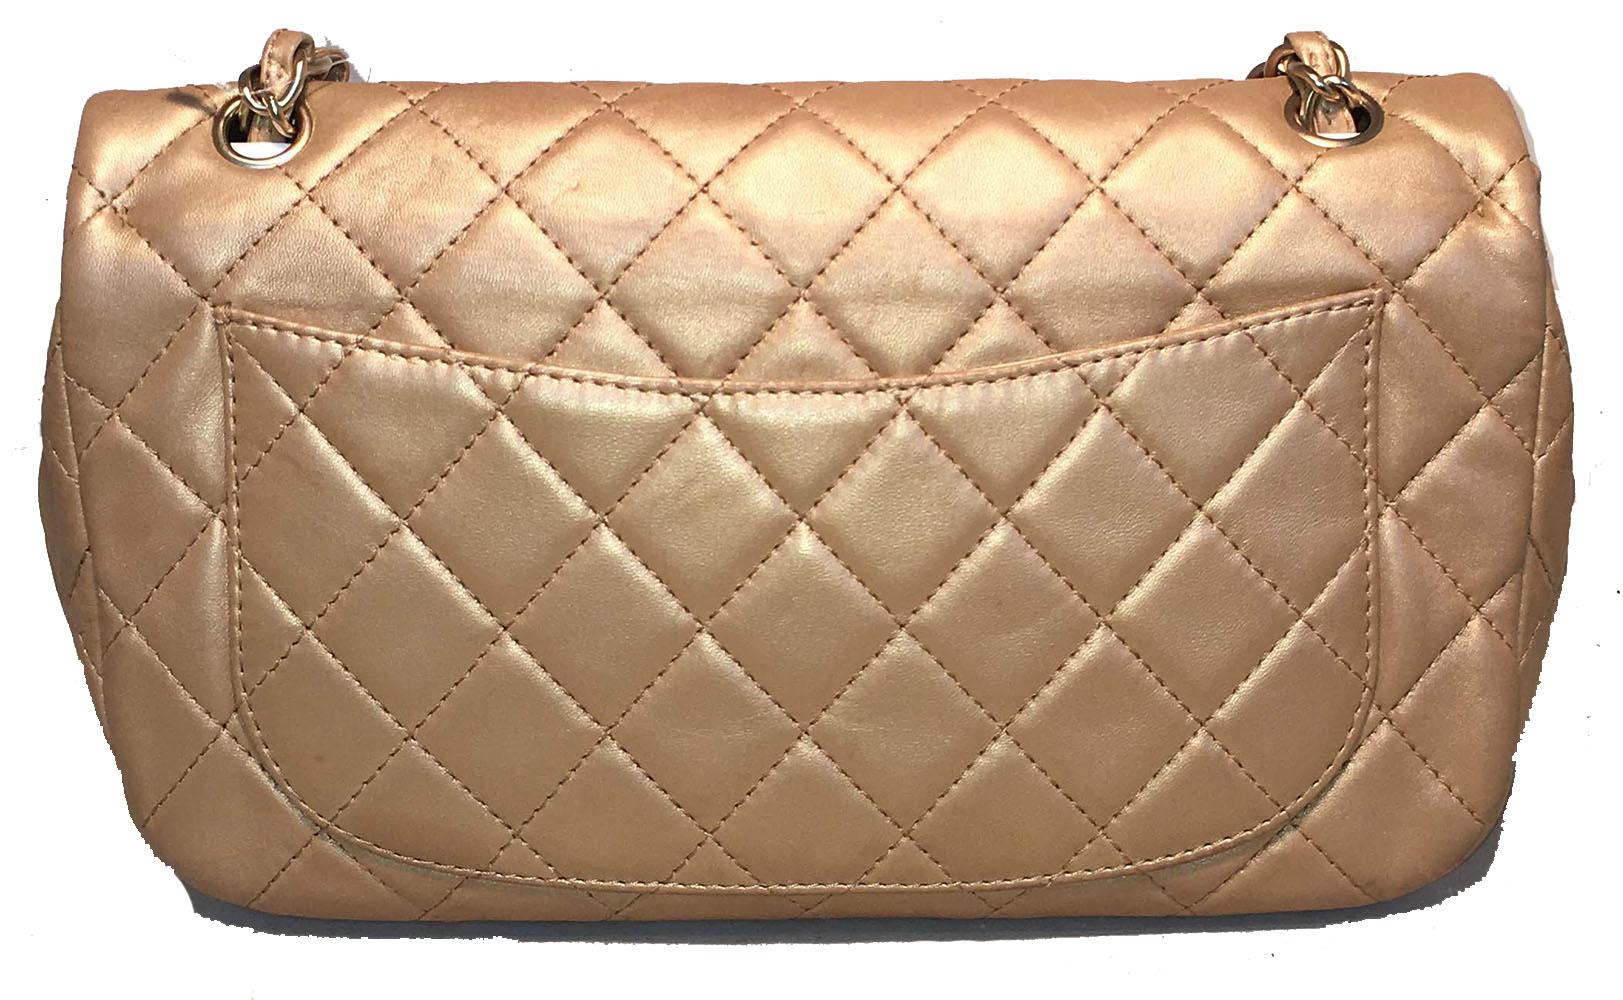 AMAZING Chanel gold leather gem logo closure classic flap shoulder bag in excellent condition. Quilted soft gold leather exterior trimmed with matte gold hardware, woven chain and leather doubled shoulder strap and gorgeous gem embellished front